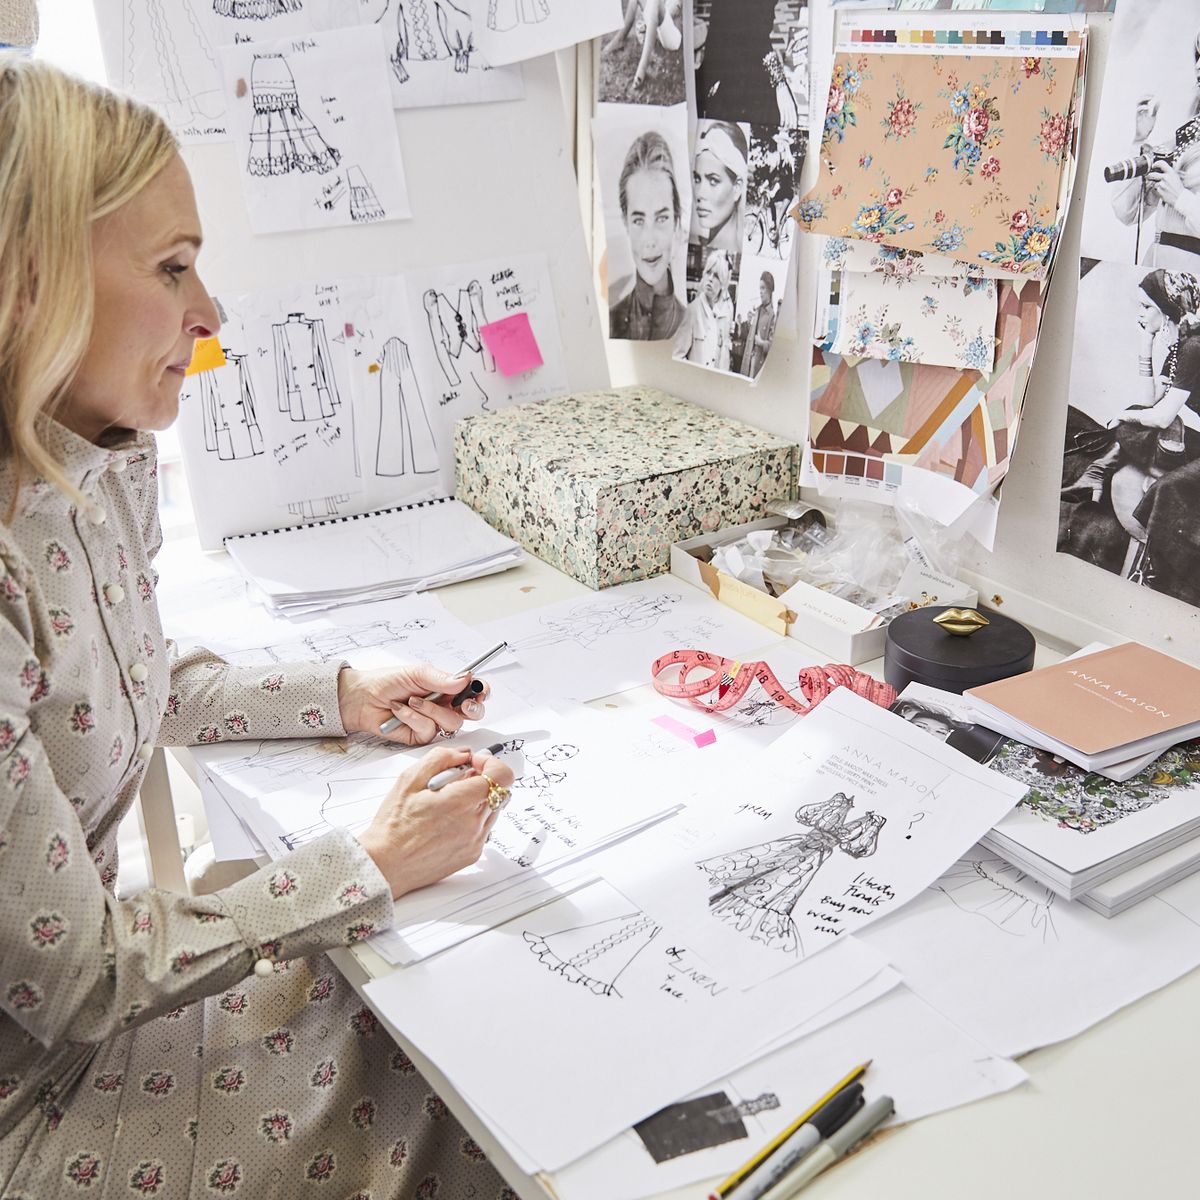 6 lessons in style from fashion designer Anna Mason